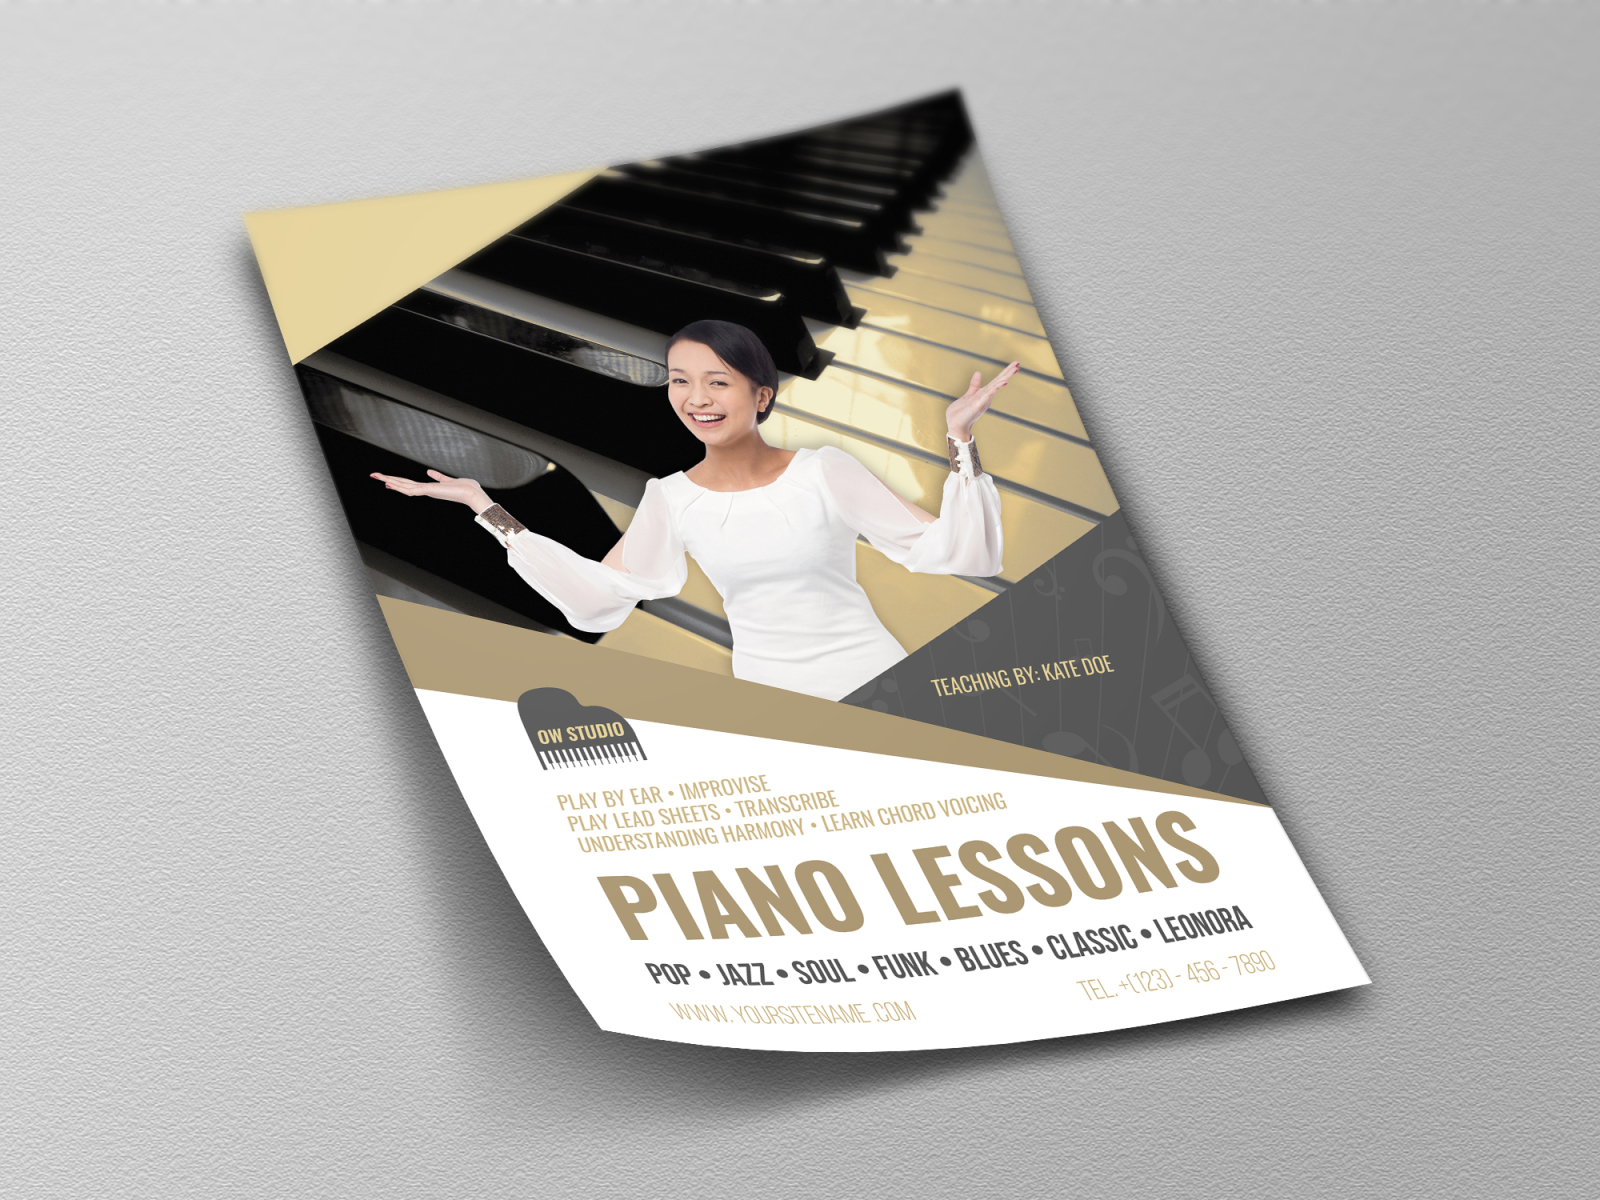 Piano Lessons Flyer Template by OWPictures on Dribbble